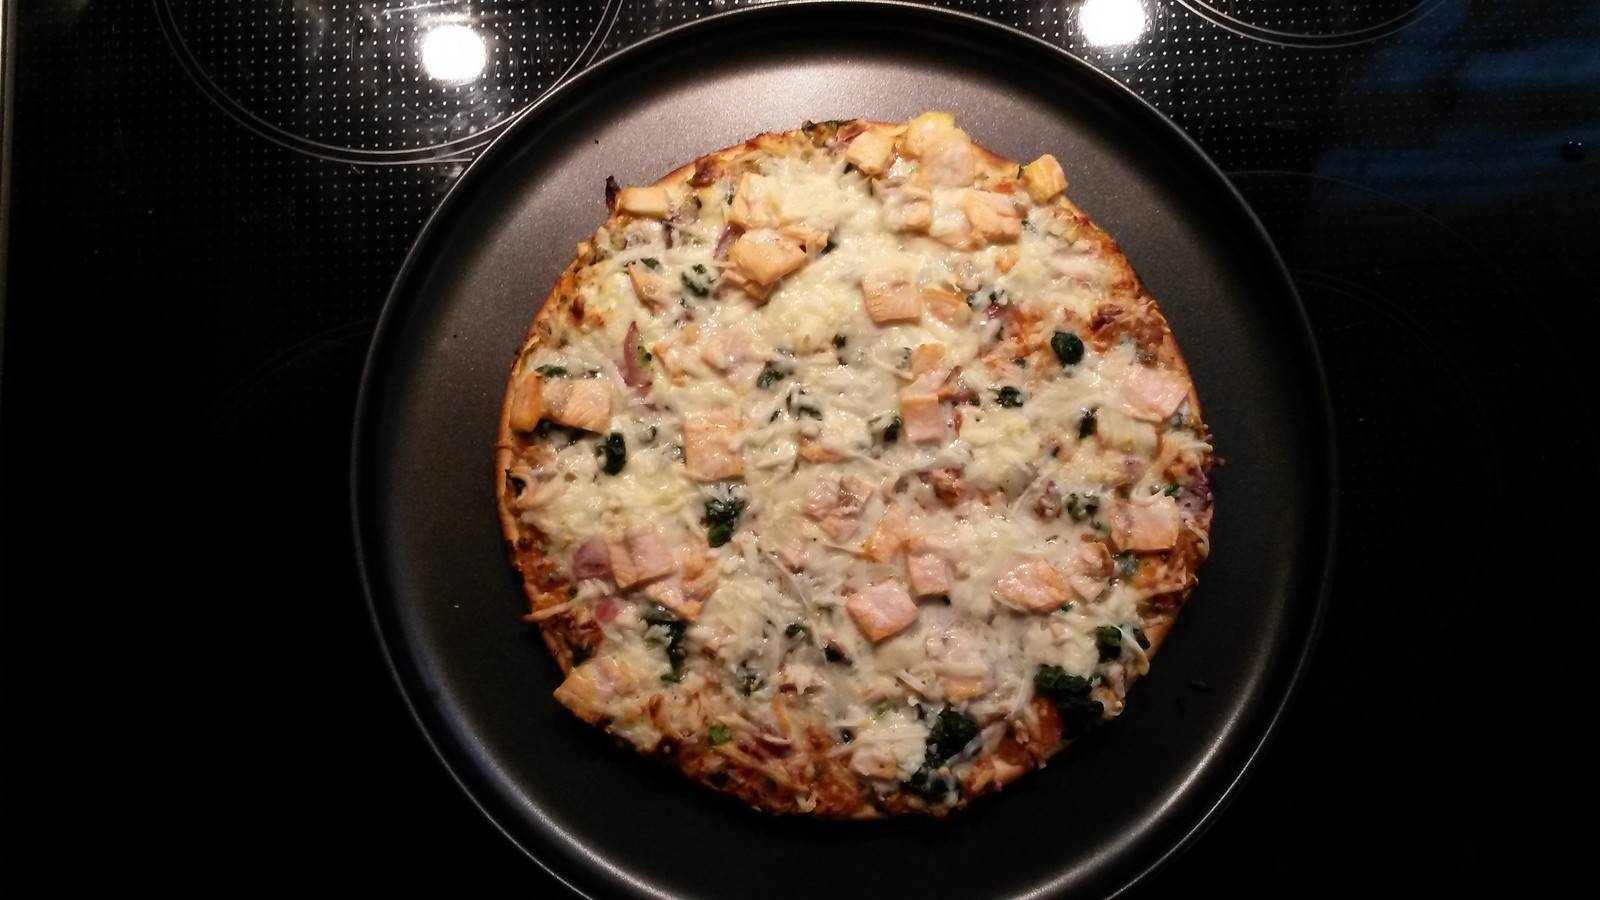 Spinat-Lachs-Pizza